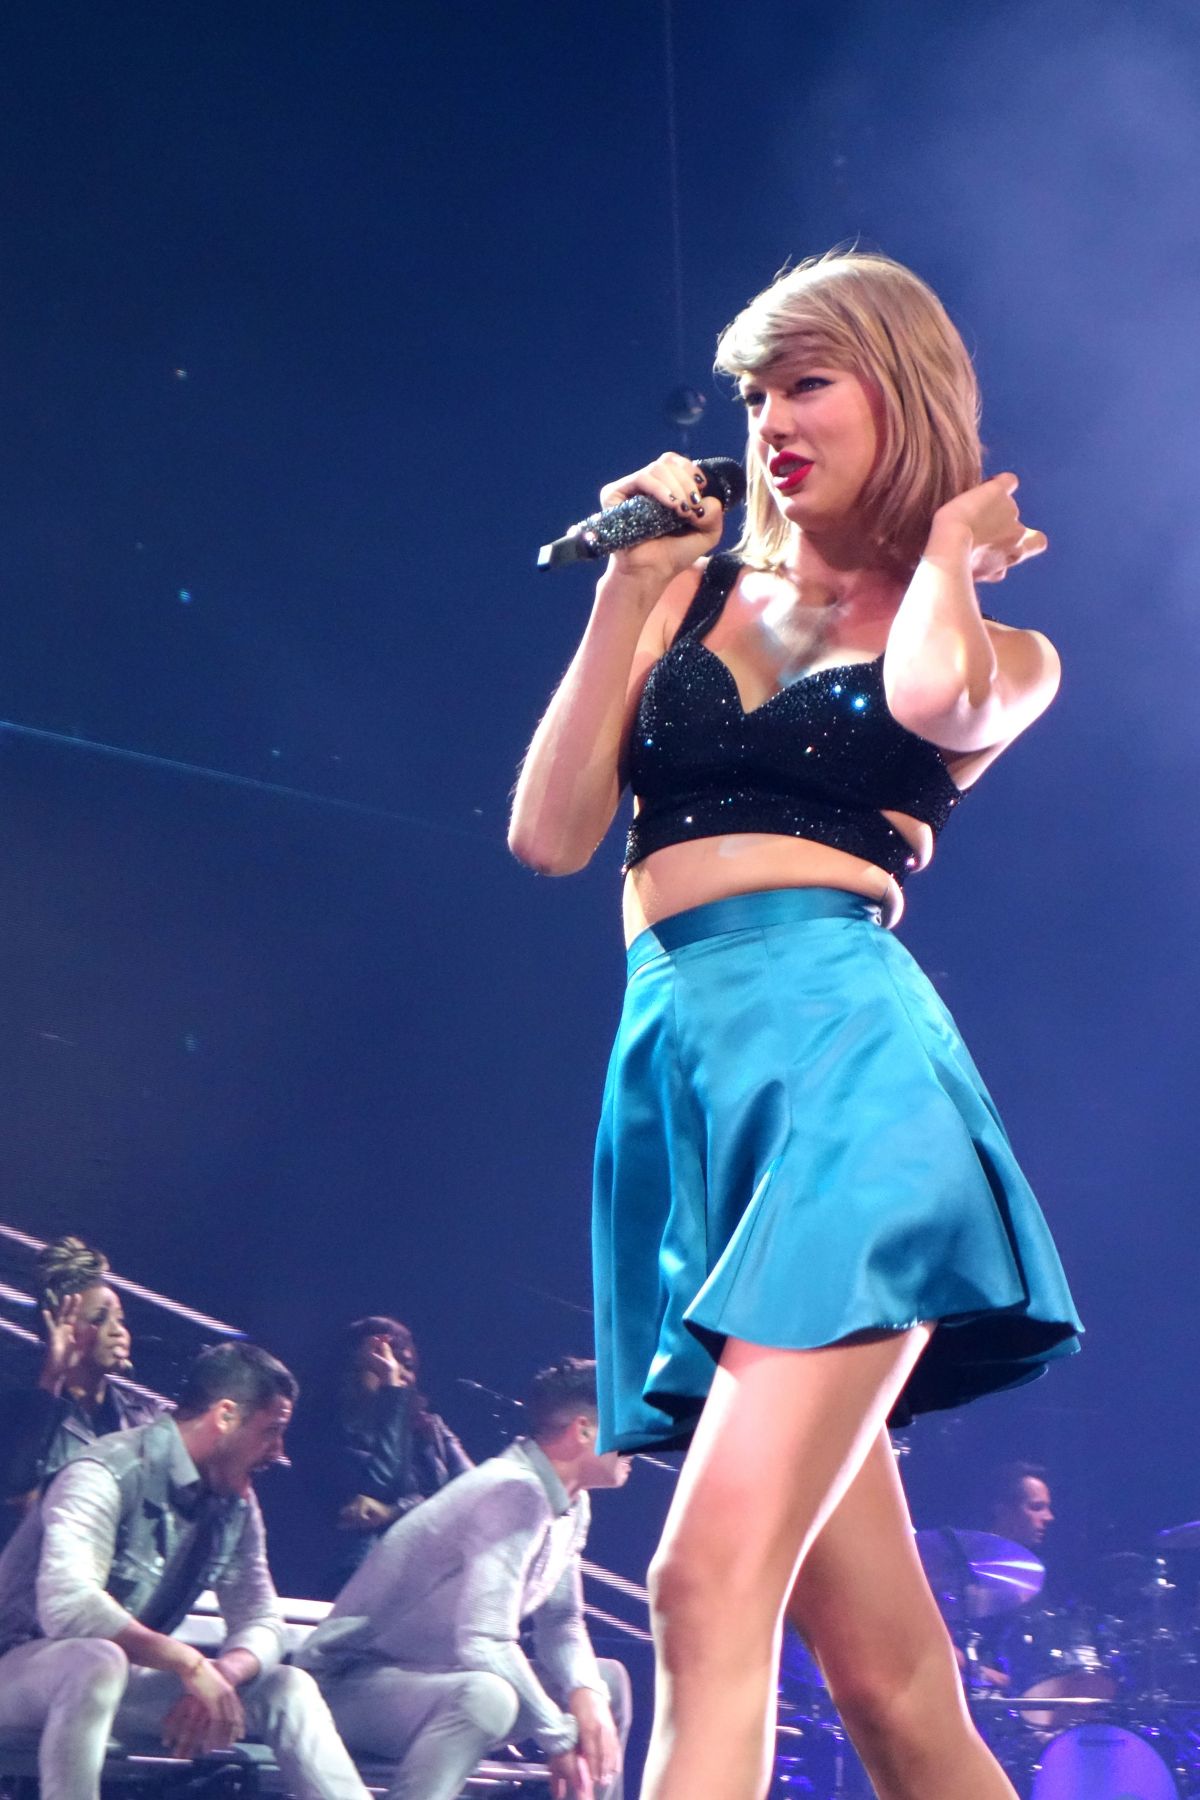 2015 Taylor Swift: The 1989 World Tour - Live